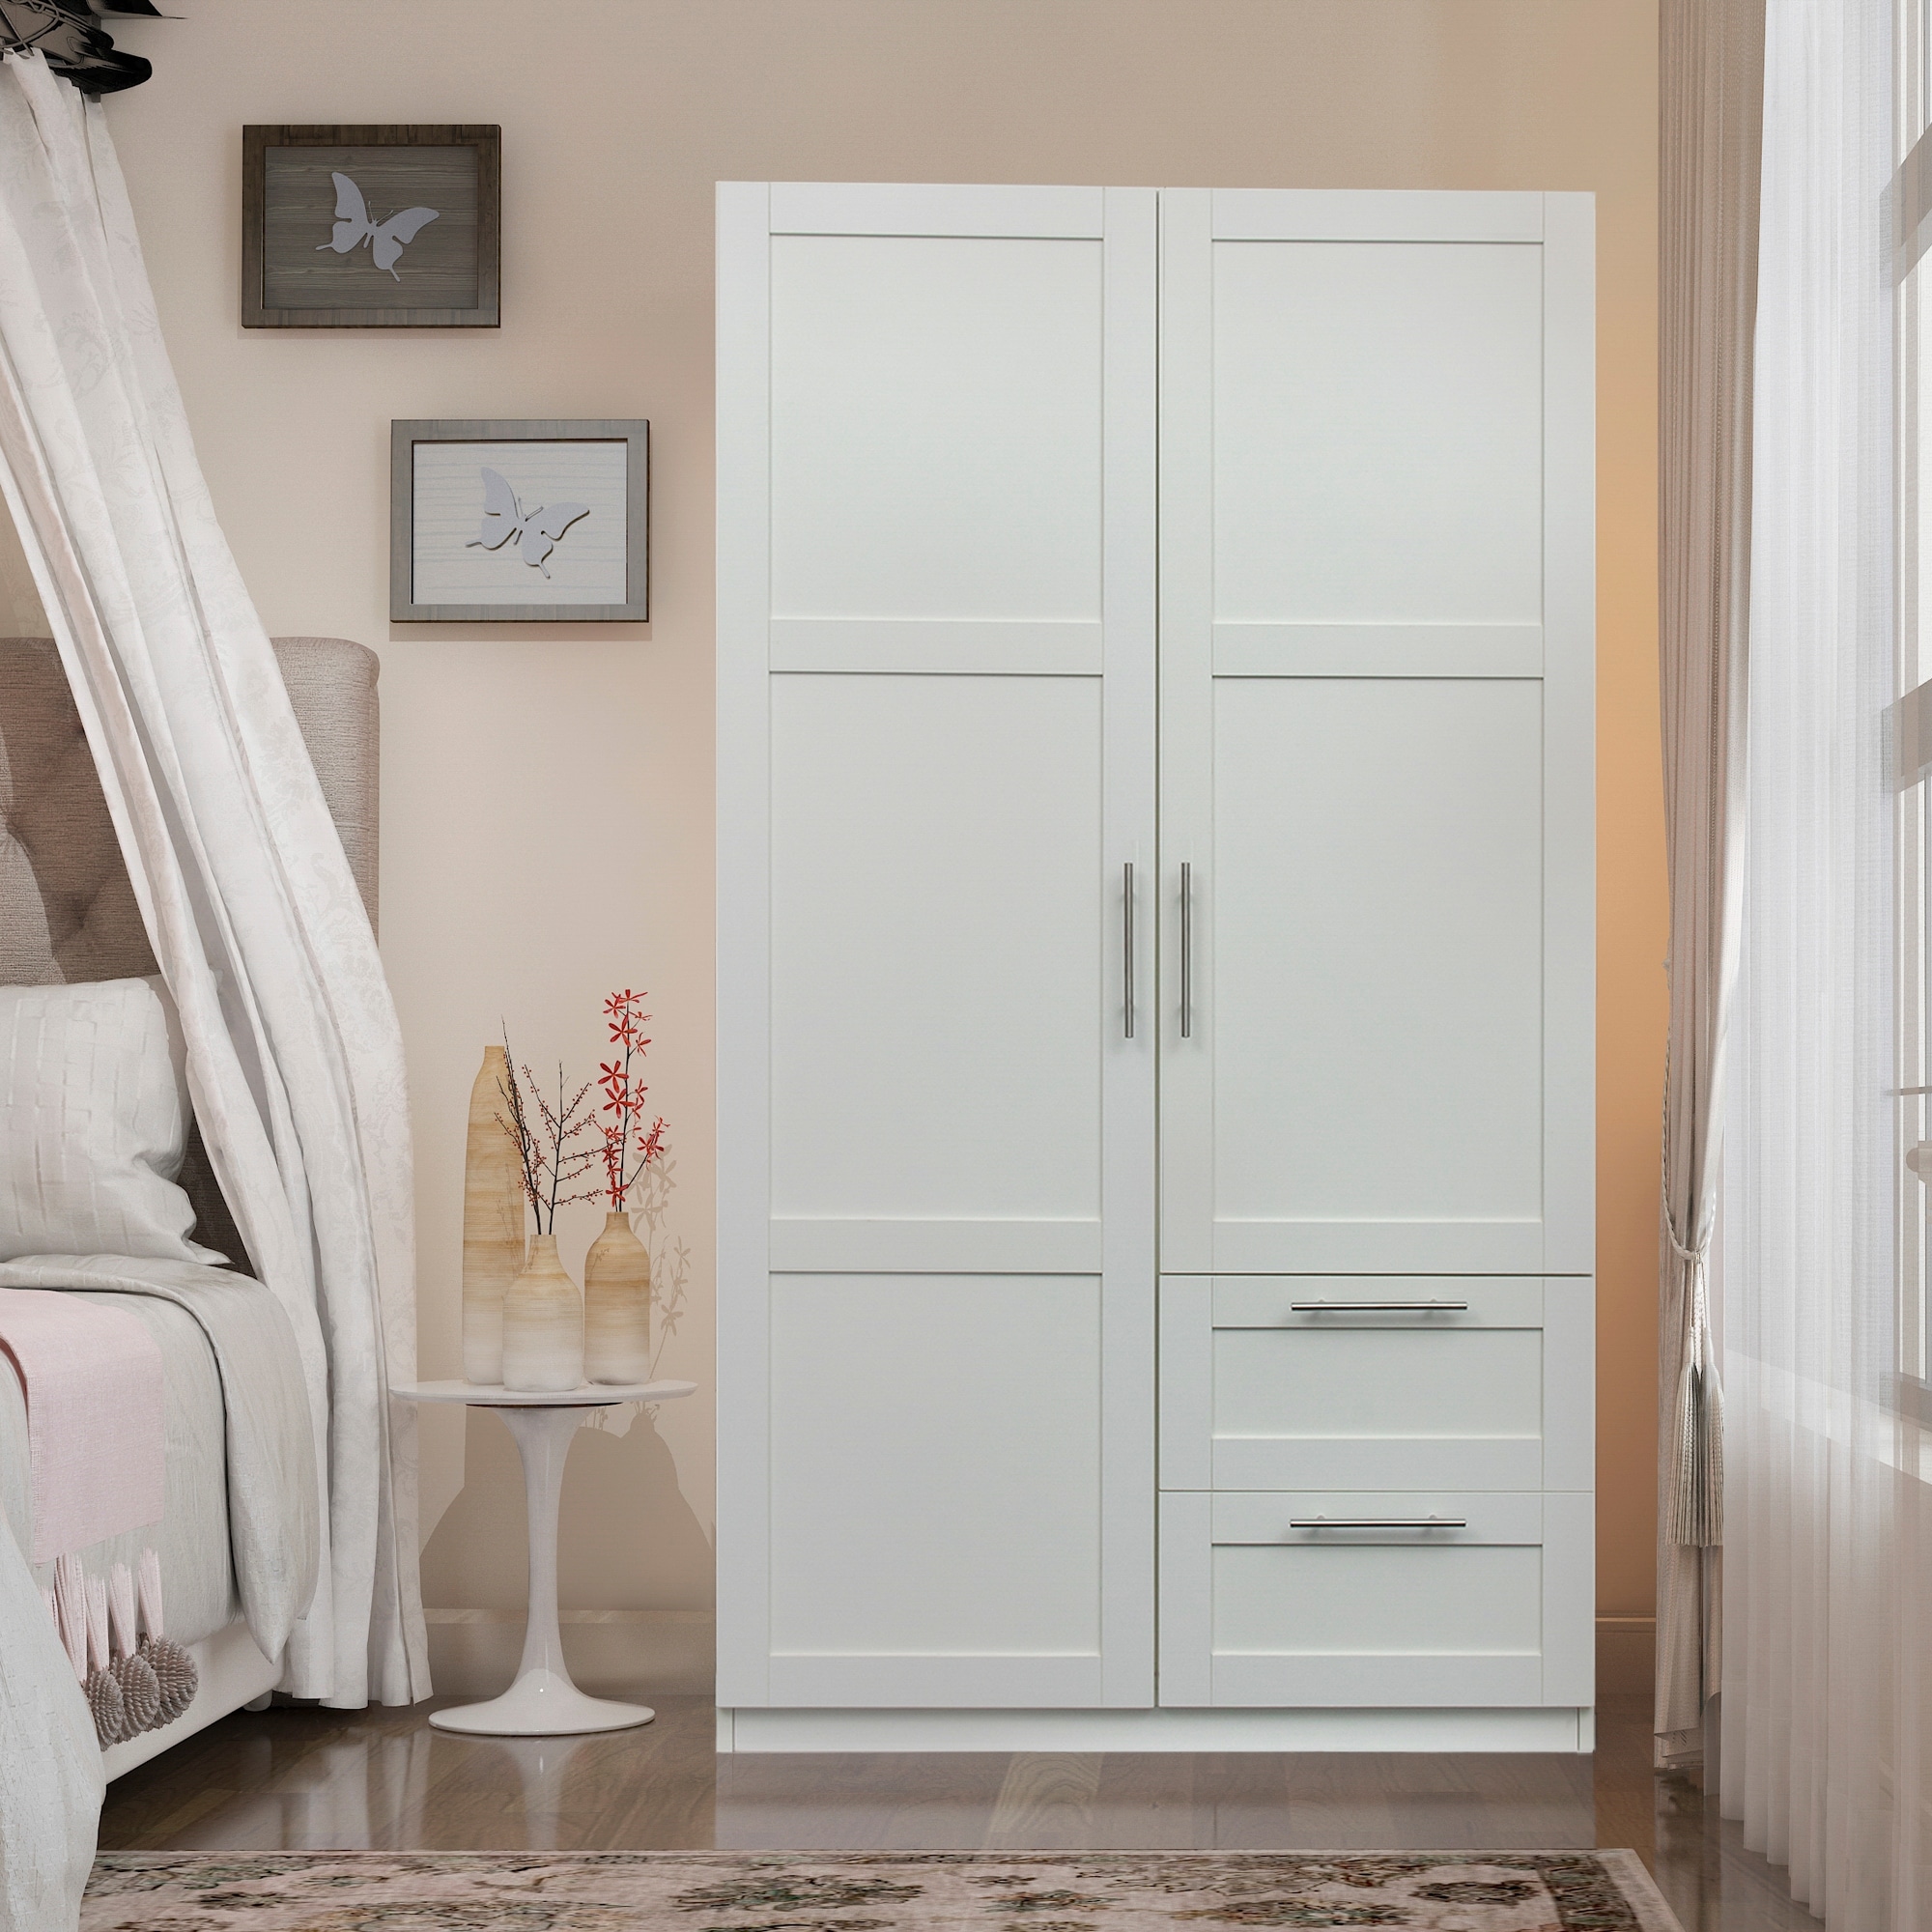 https://ak1.ostkcdn.com/images/products/is/images/direct/454e94047a2541d1c26a35aa932f72d54e5afea7/High-wardrobe-and-kitchen-cabinet-with-2-doors%2C-2-drawers-and-5-storage-spaces.jpg